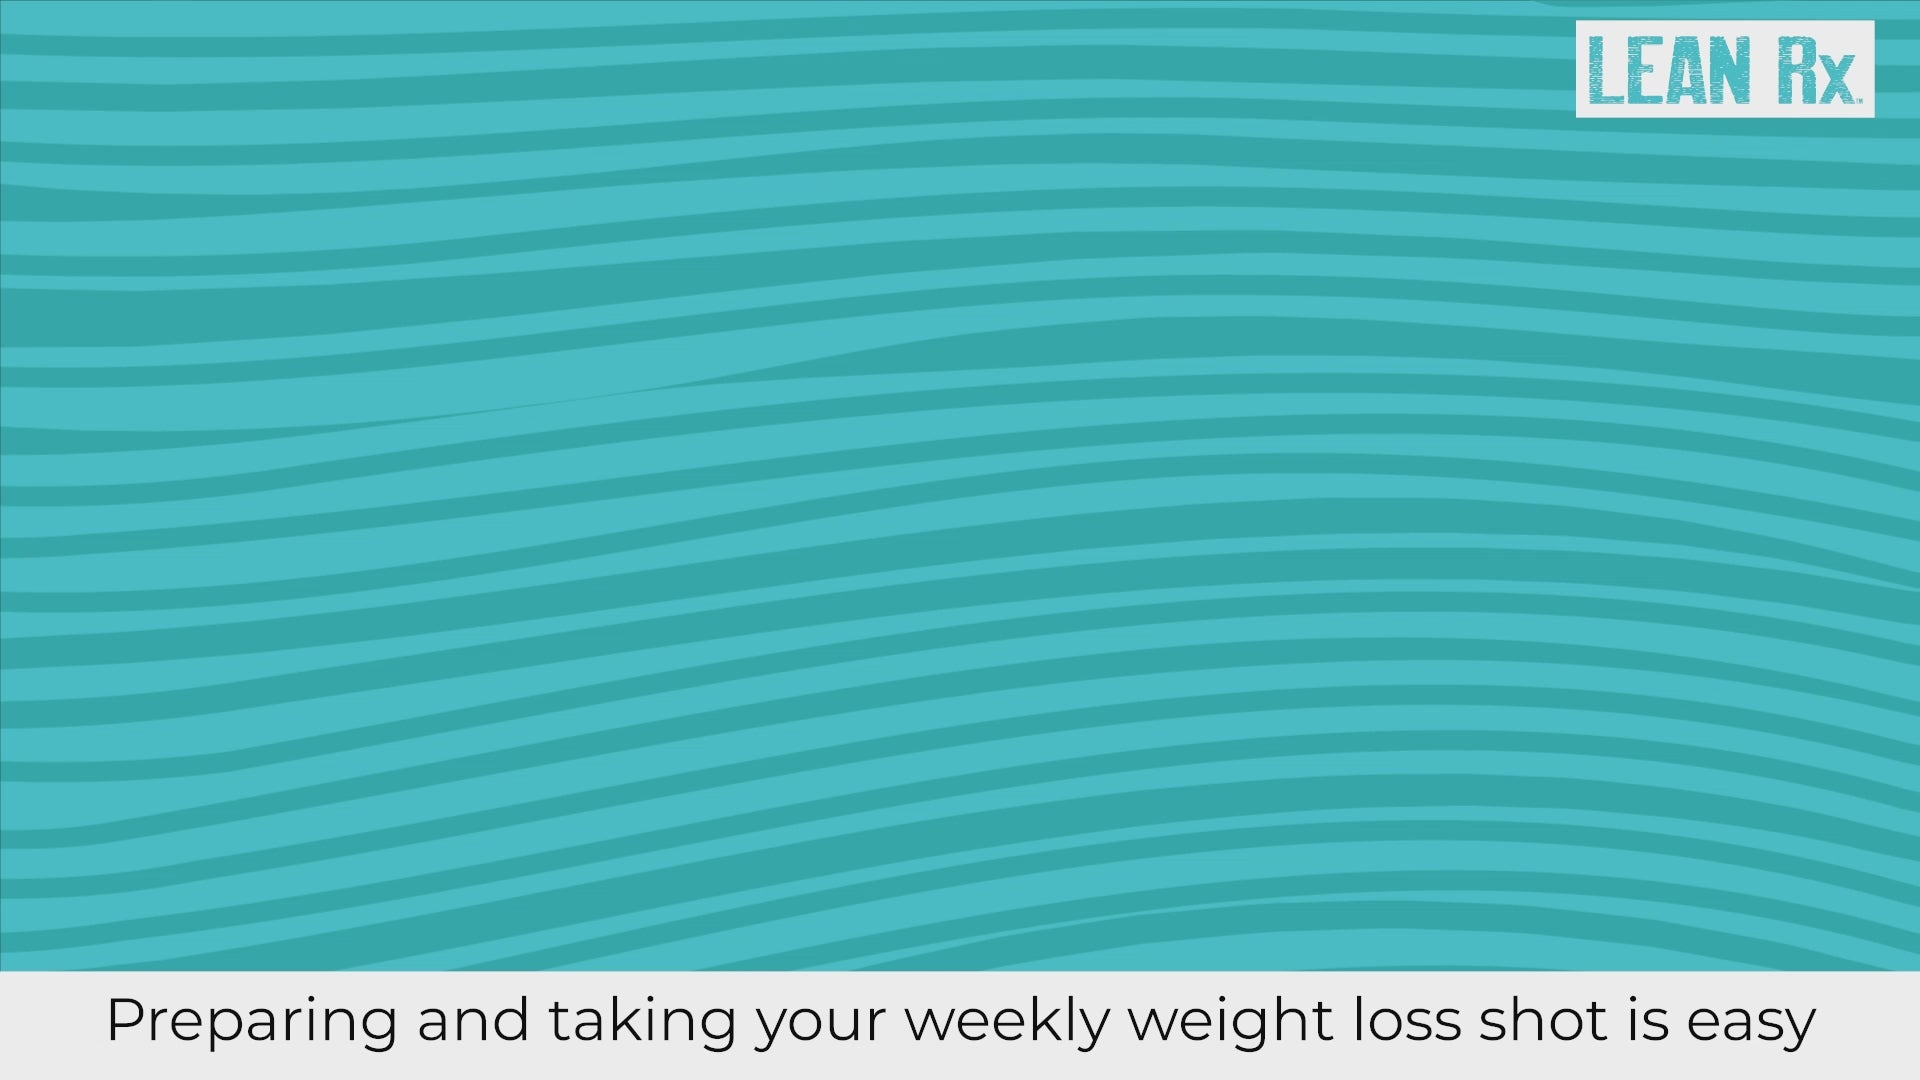 Cargar video: animated video explaining the process of self-administering a weekly weight loss shot.